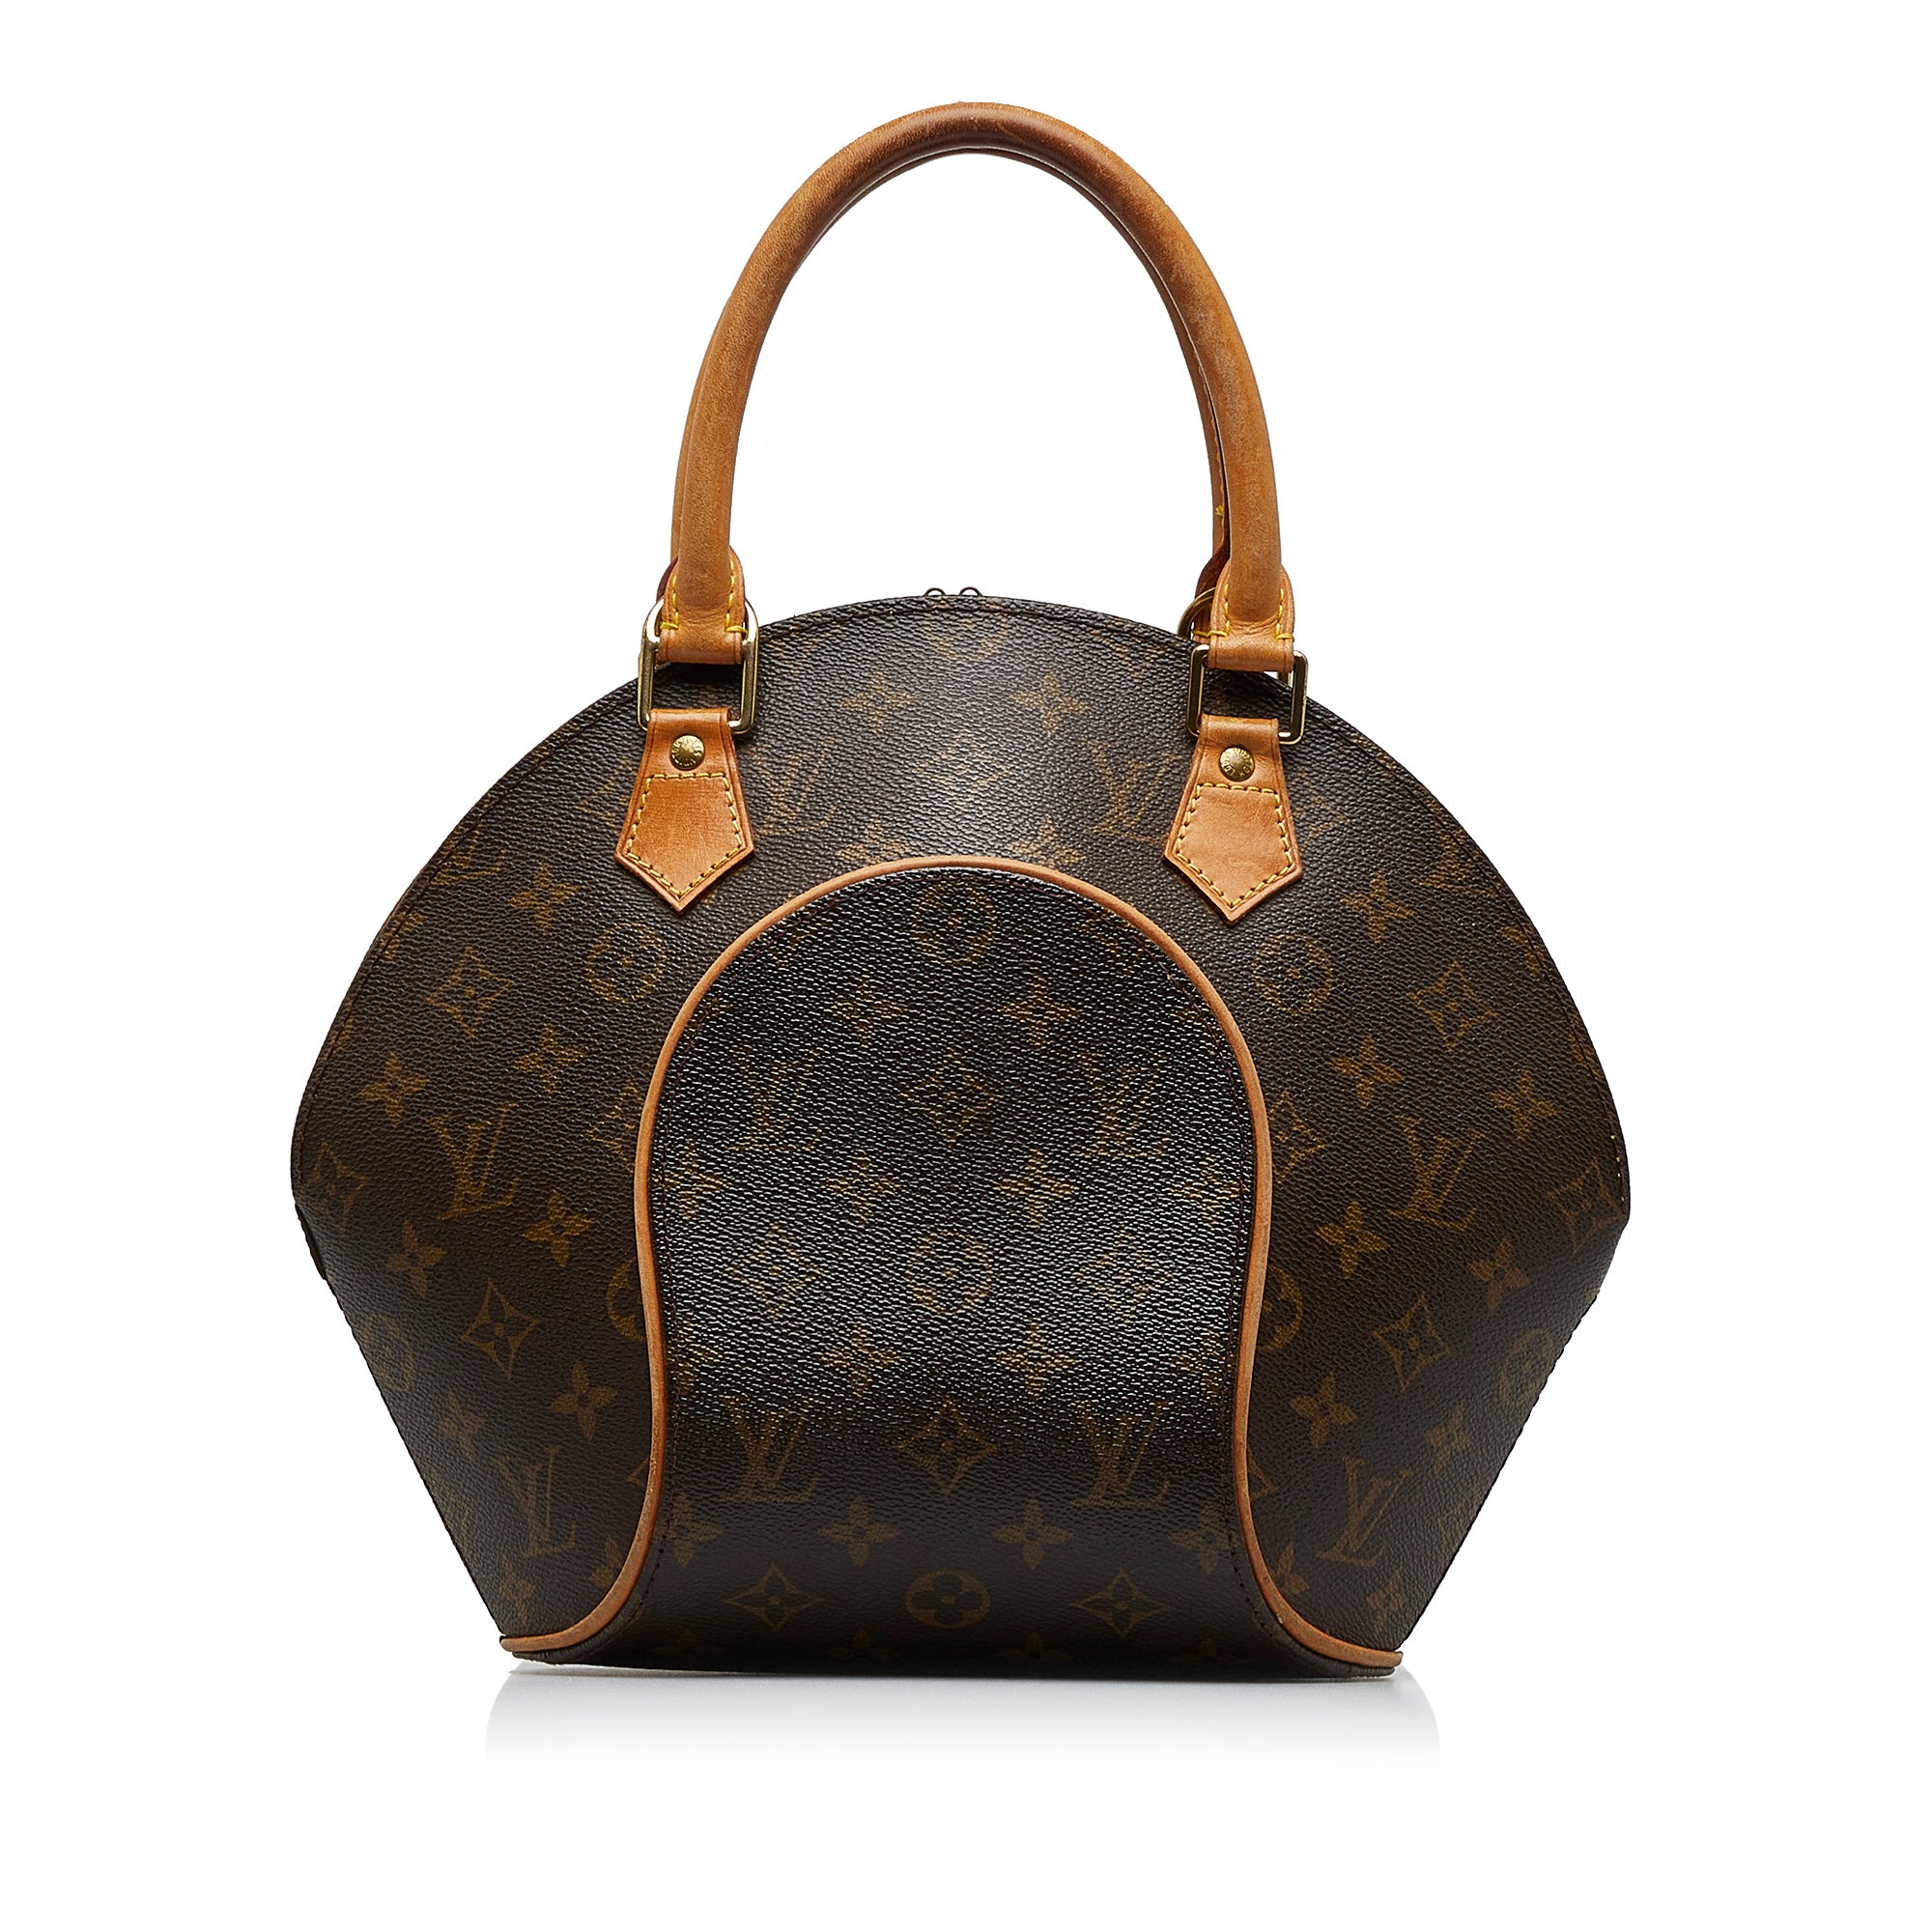 A Guide to Authenticating the Louis Vuitton Monogram Wilshire